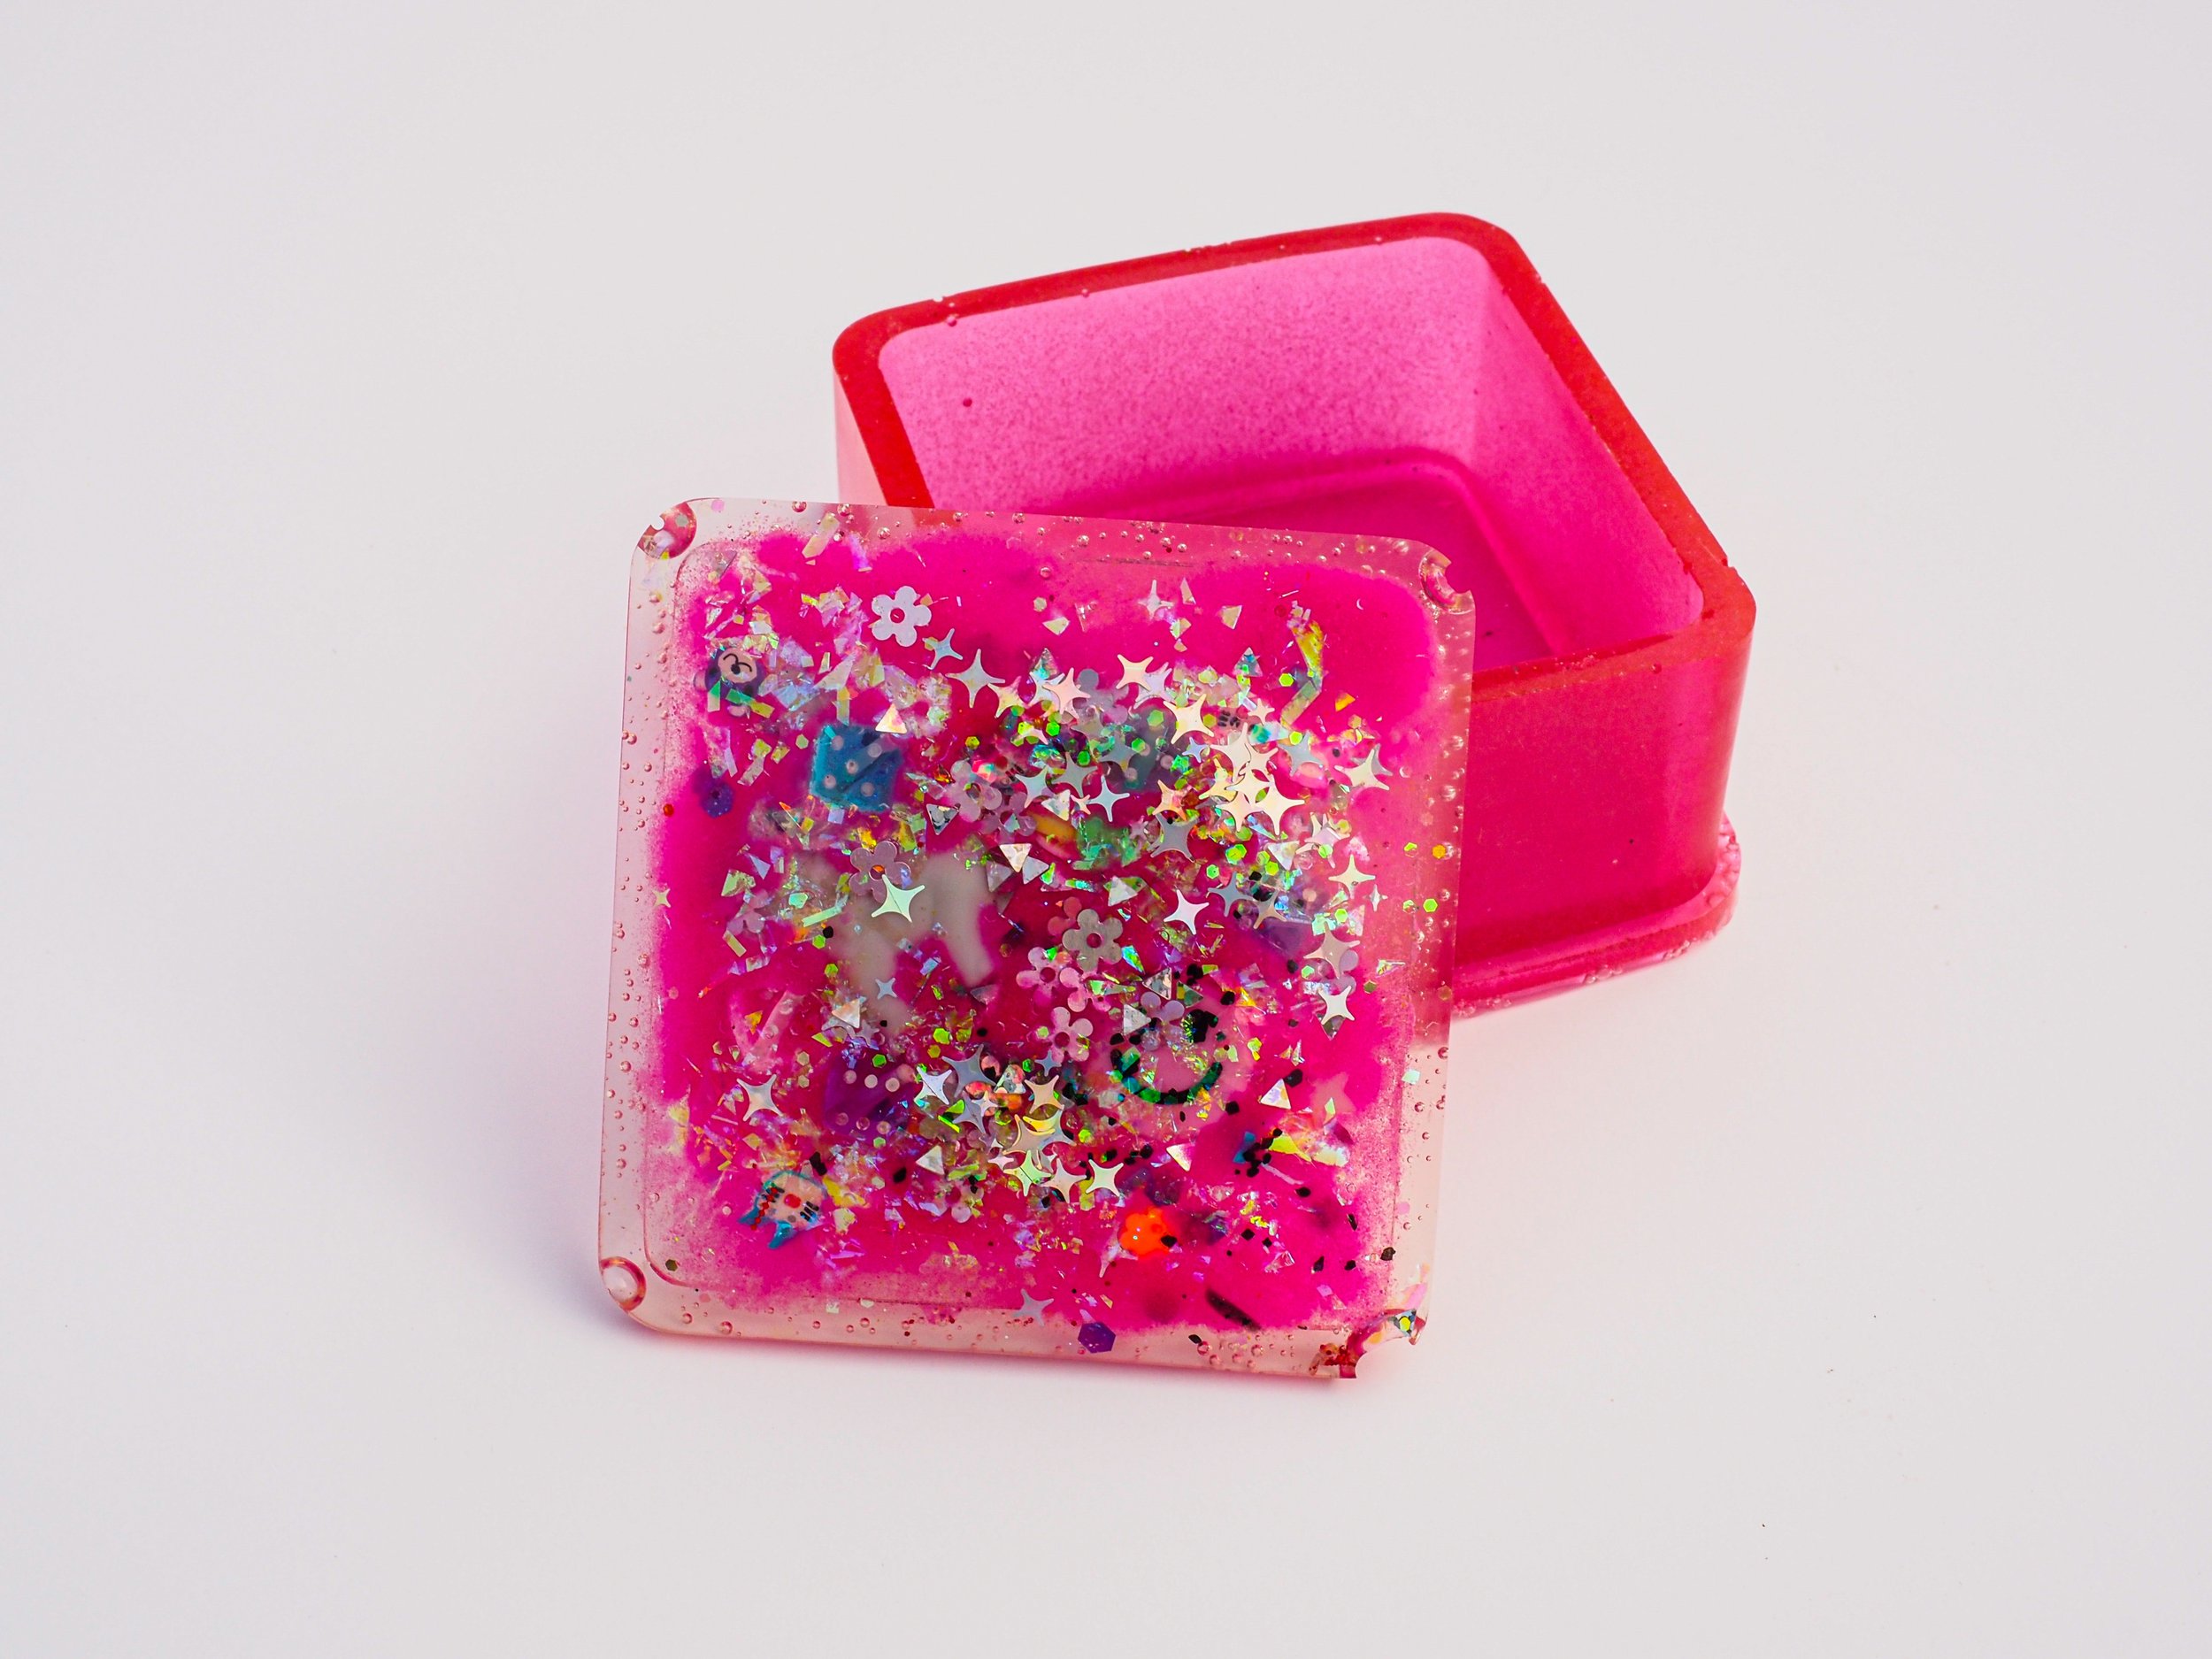 swuare box with pin glitter 4.jpg